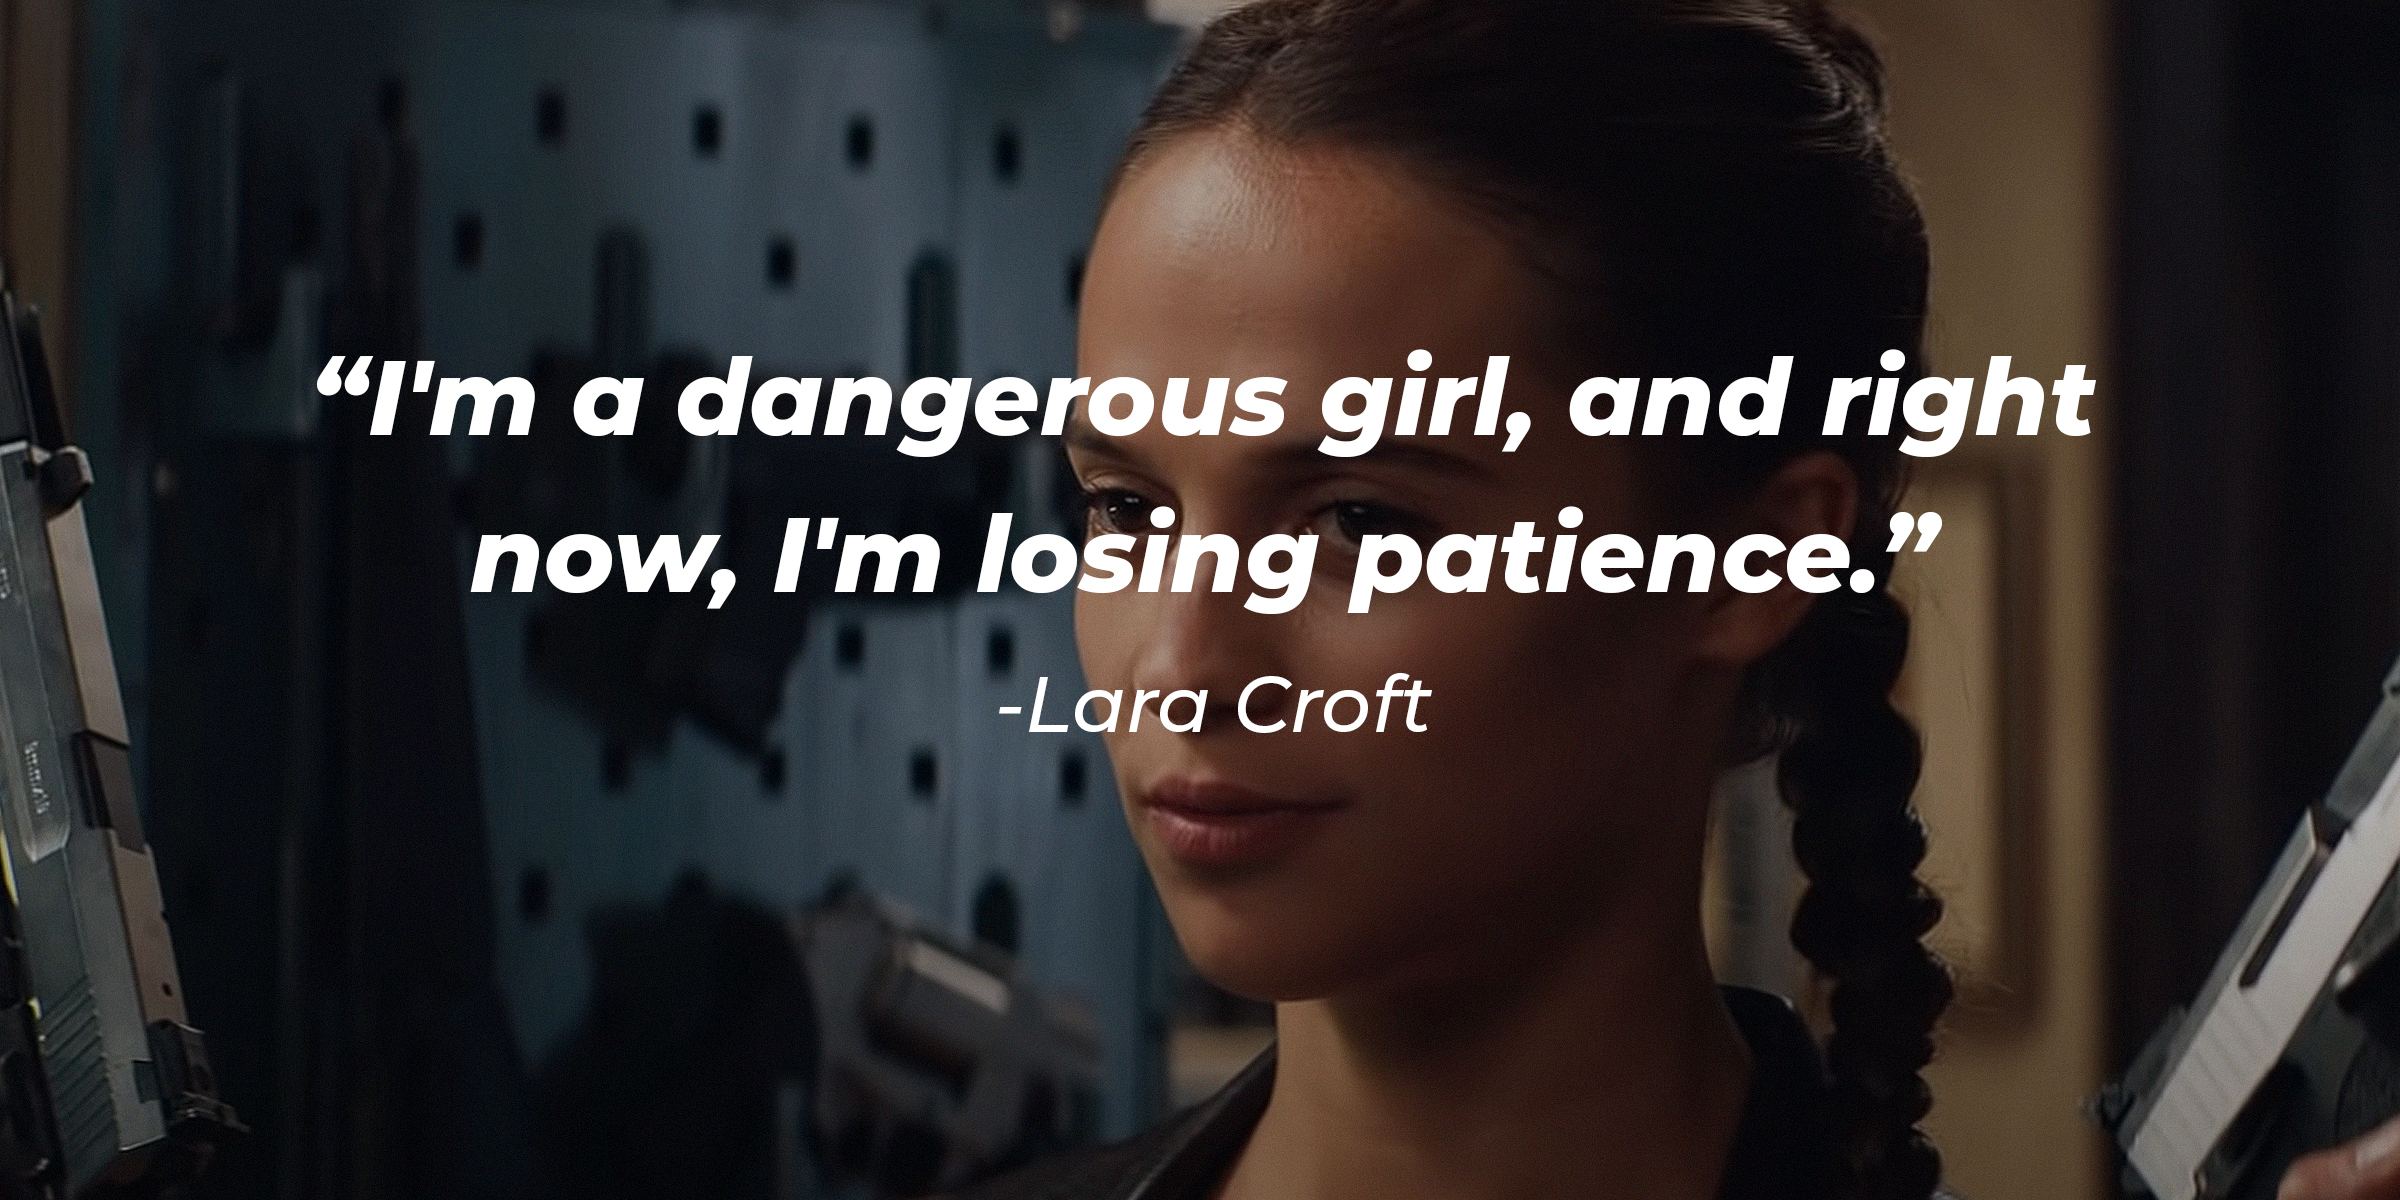 Vikander, with the Lara Croft quoteAn image of the Lara Croft played by Alicia: "I'm a dangerous girl, and right now, I'm losing patience." | Source: youtube.com/WarnerBrosPictures